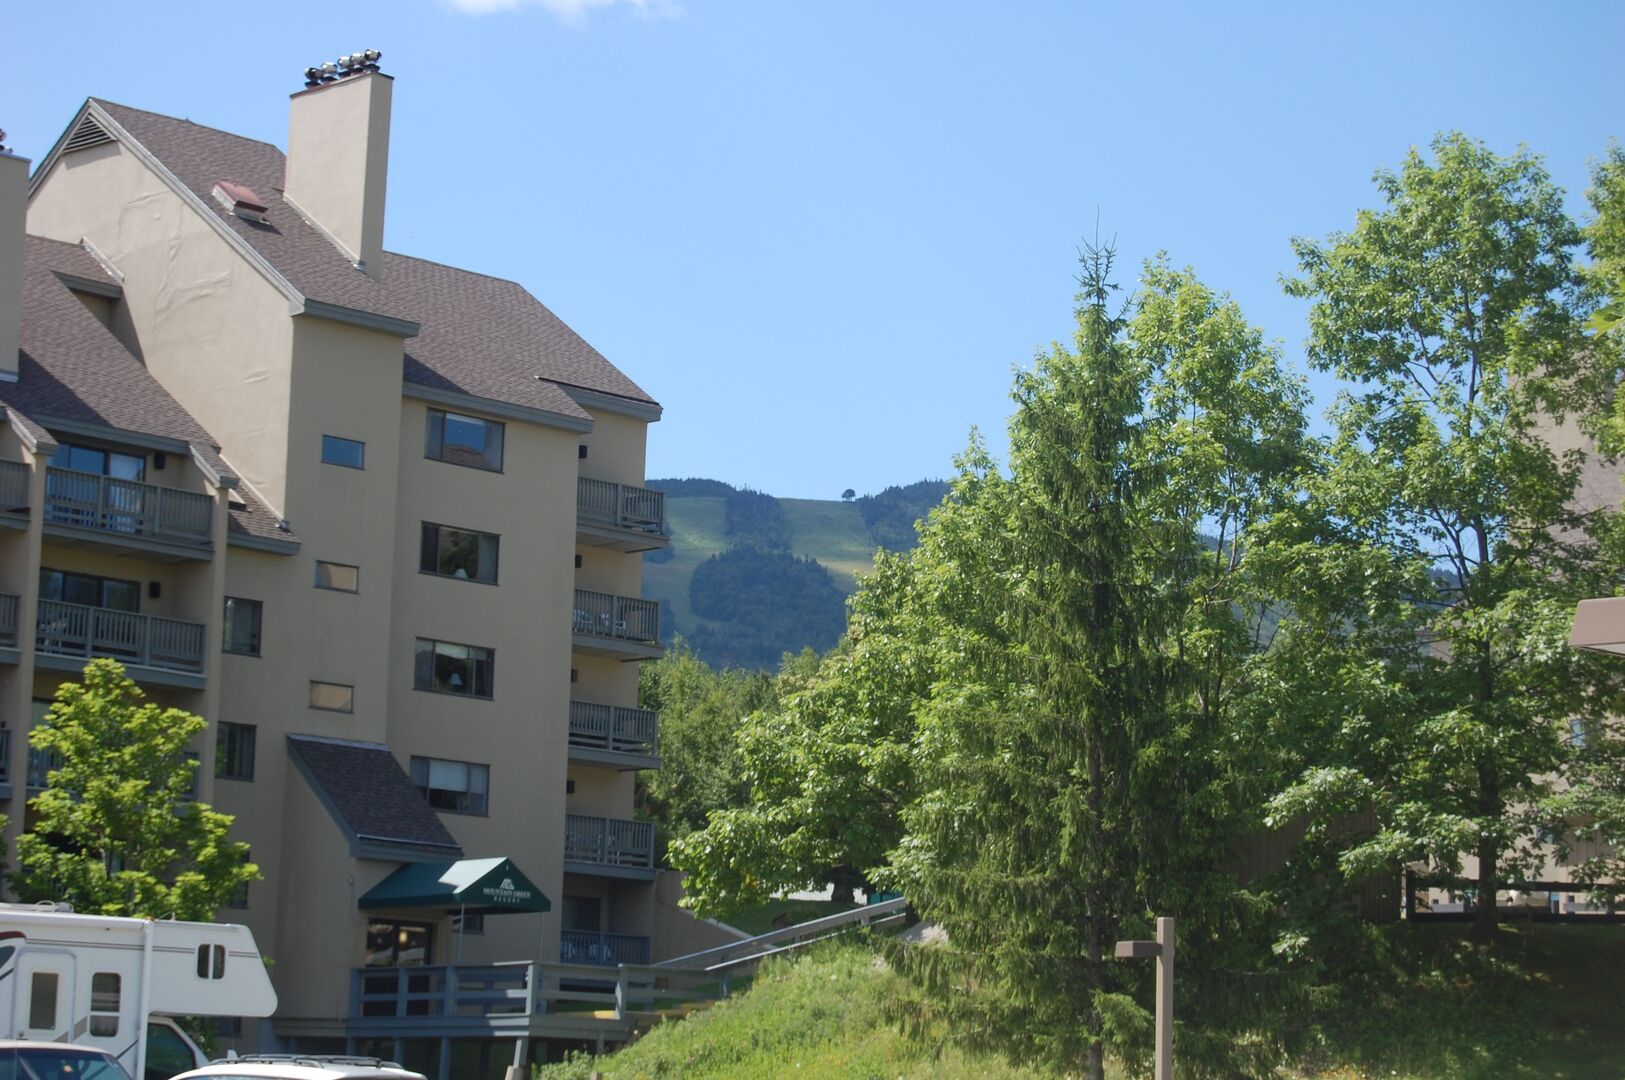 View of Killington and Mt. Green building 1 in the summer